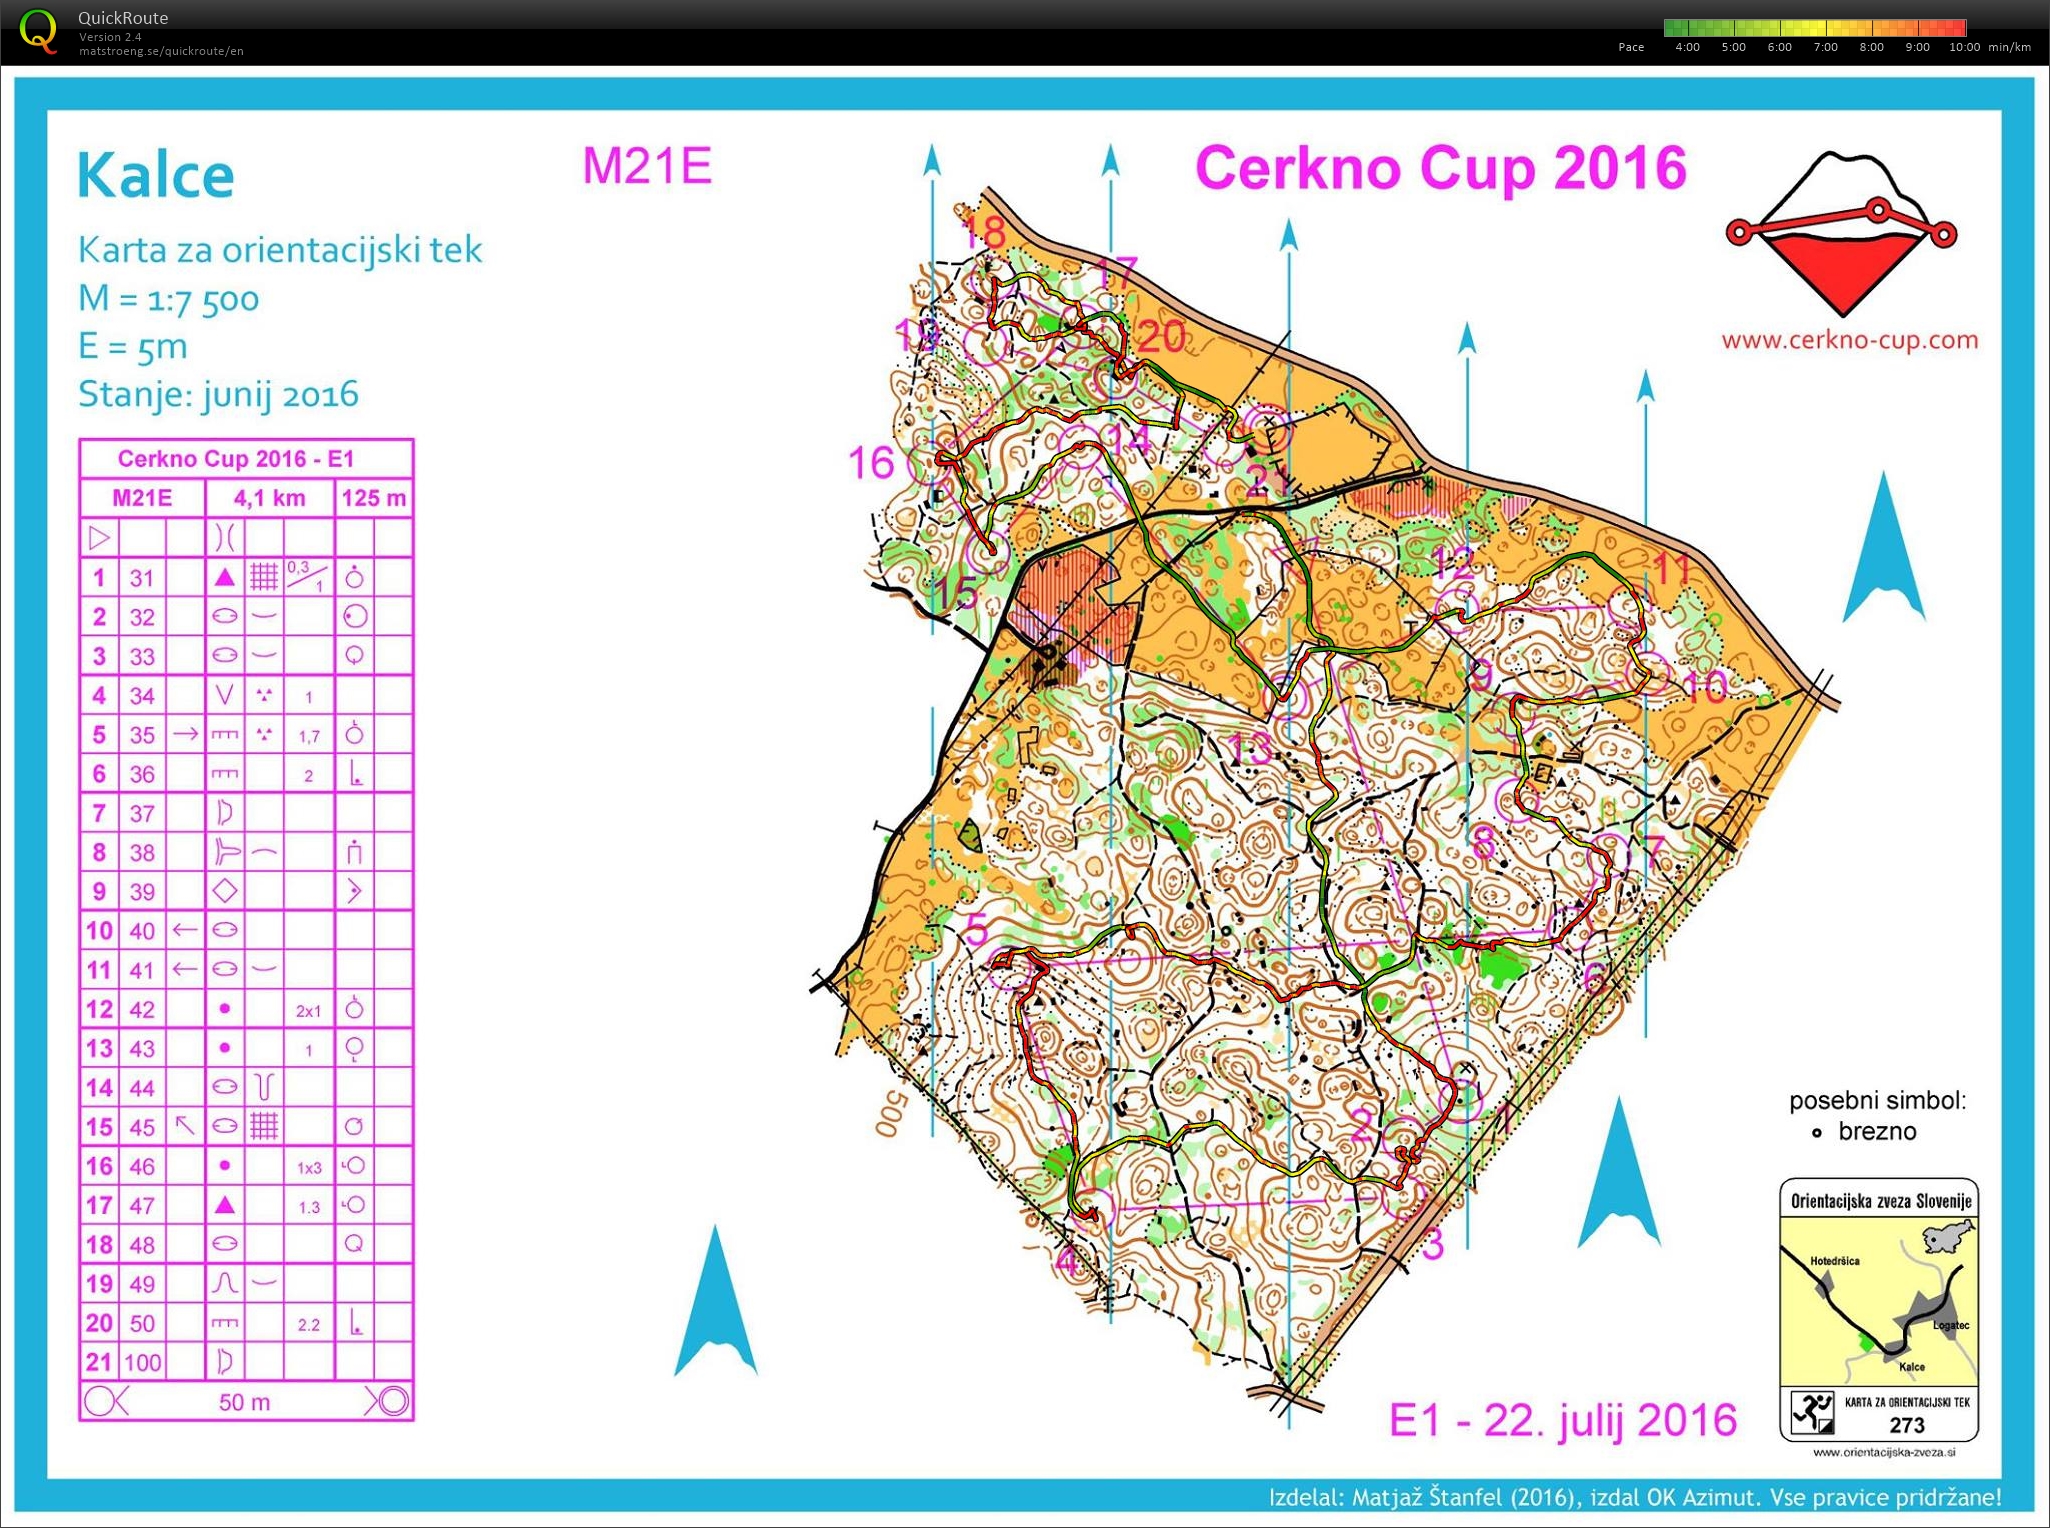 Cerkno Cup stage 1 (22.07.2016)